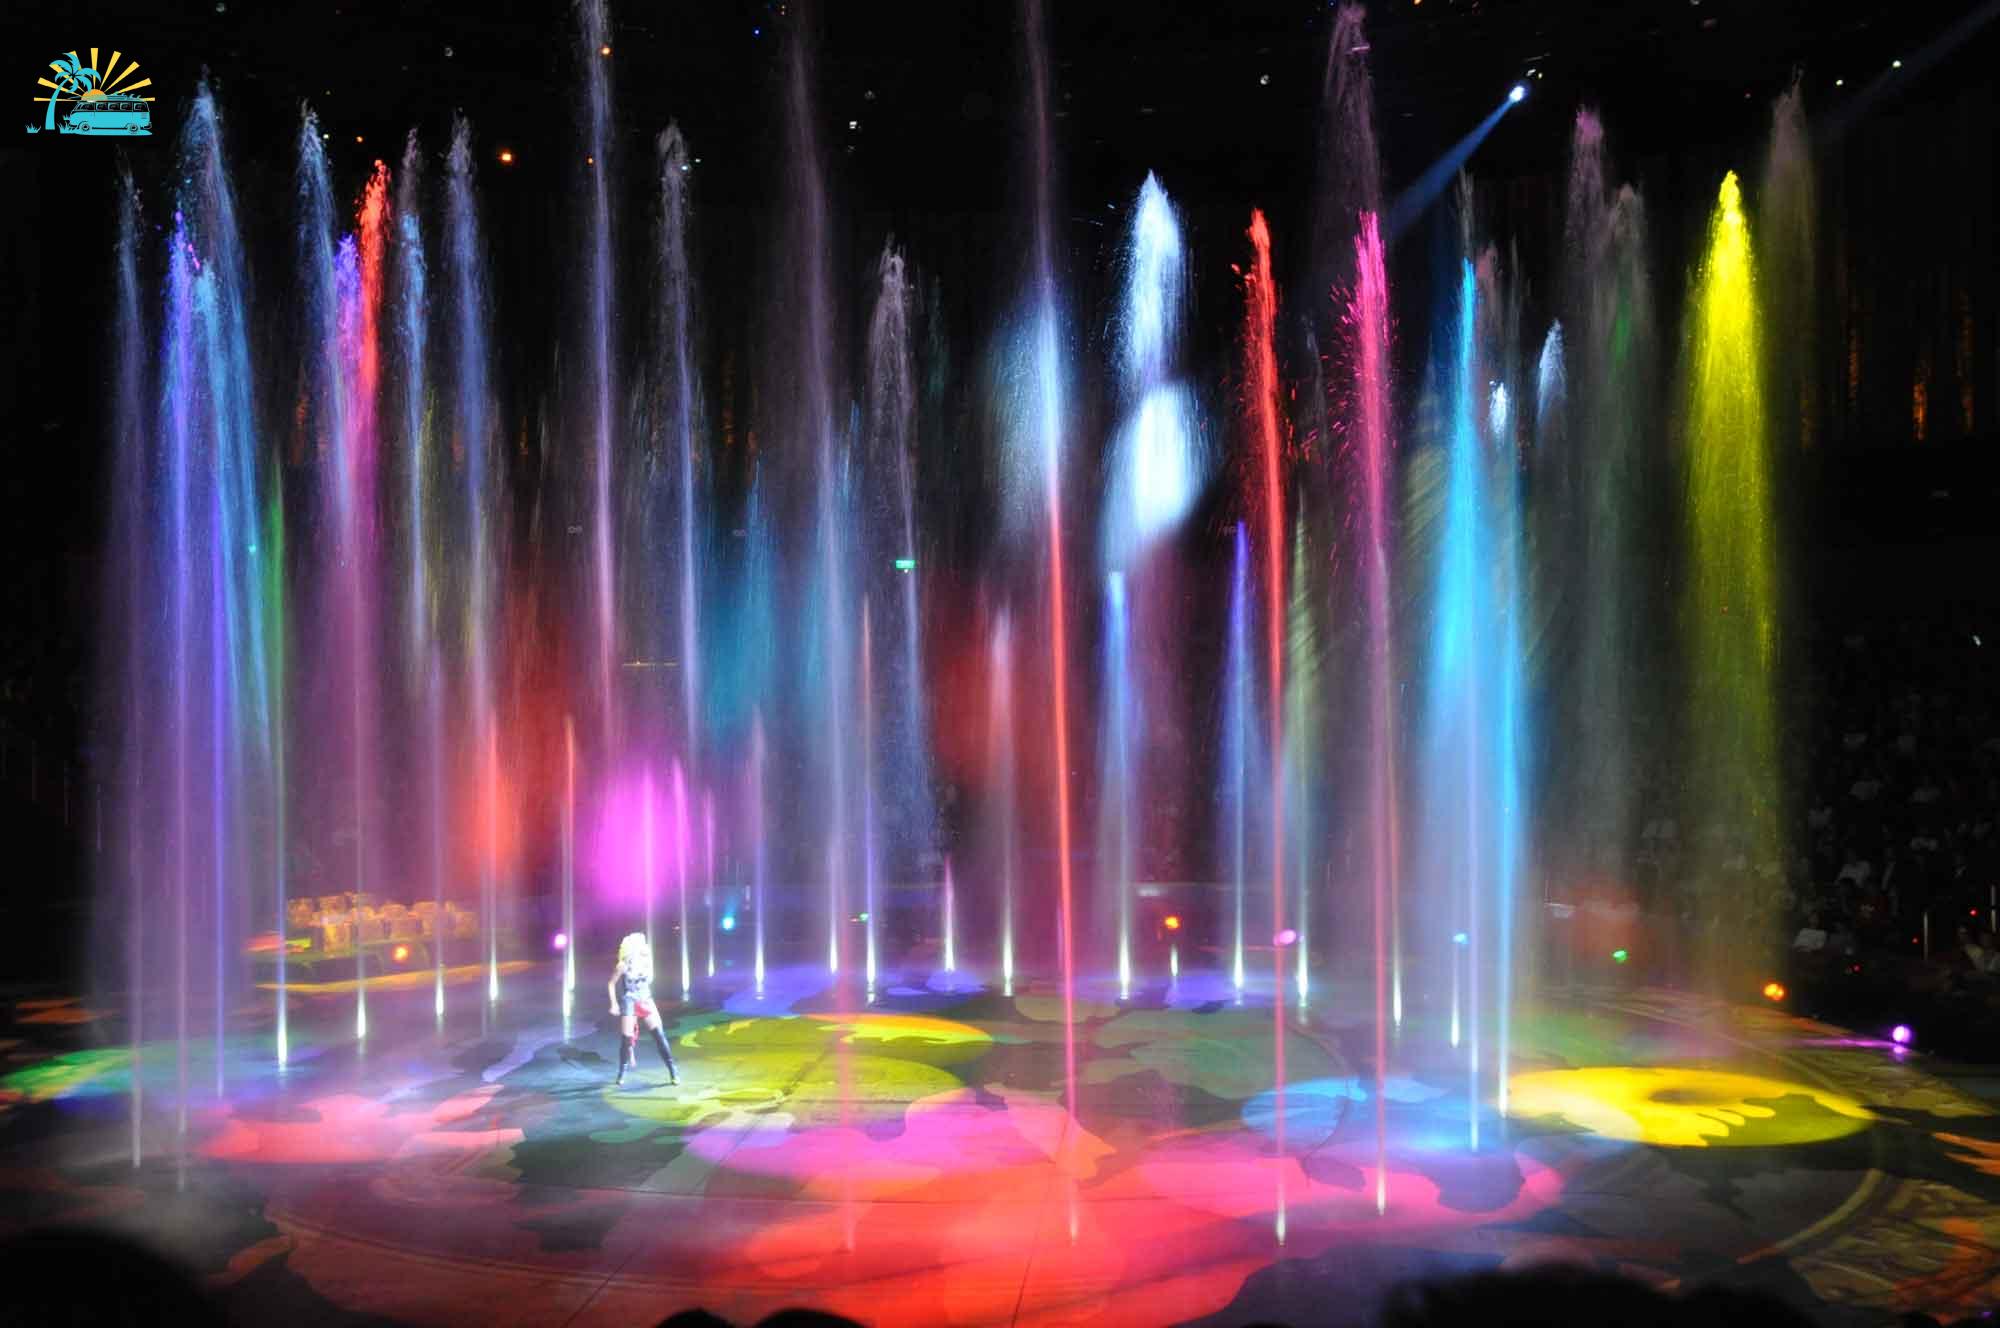 A lady performing solo in the middle of colorful water fountains